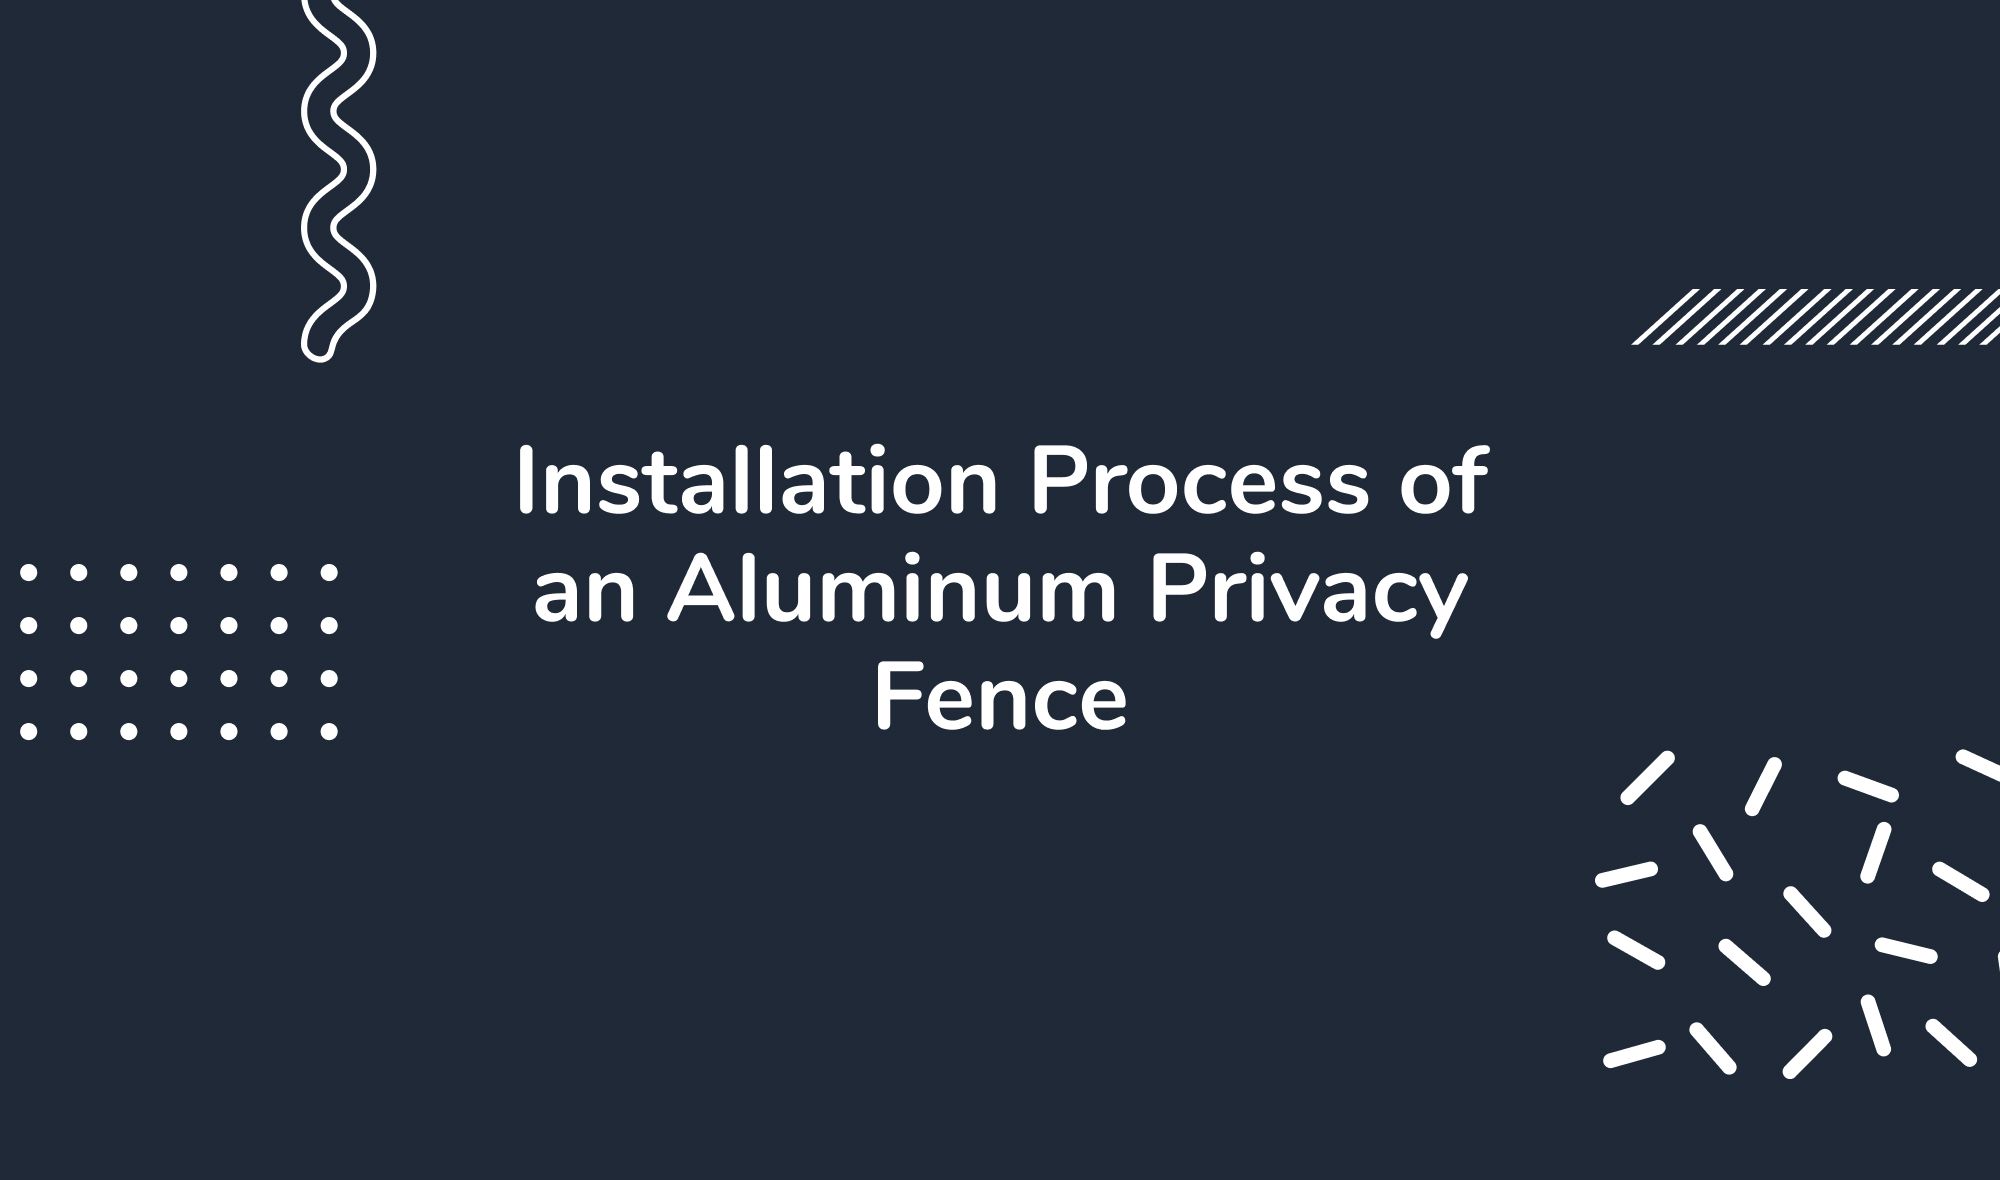 Installation Process of an Aluminum Privacy Fence